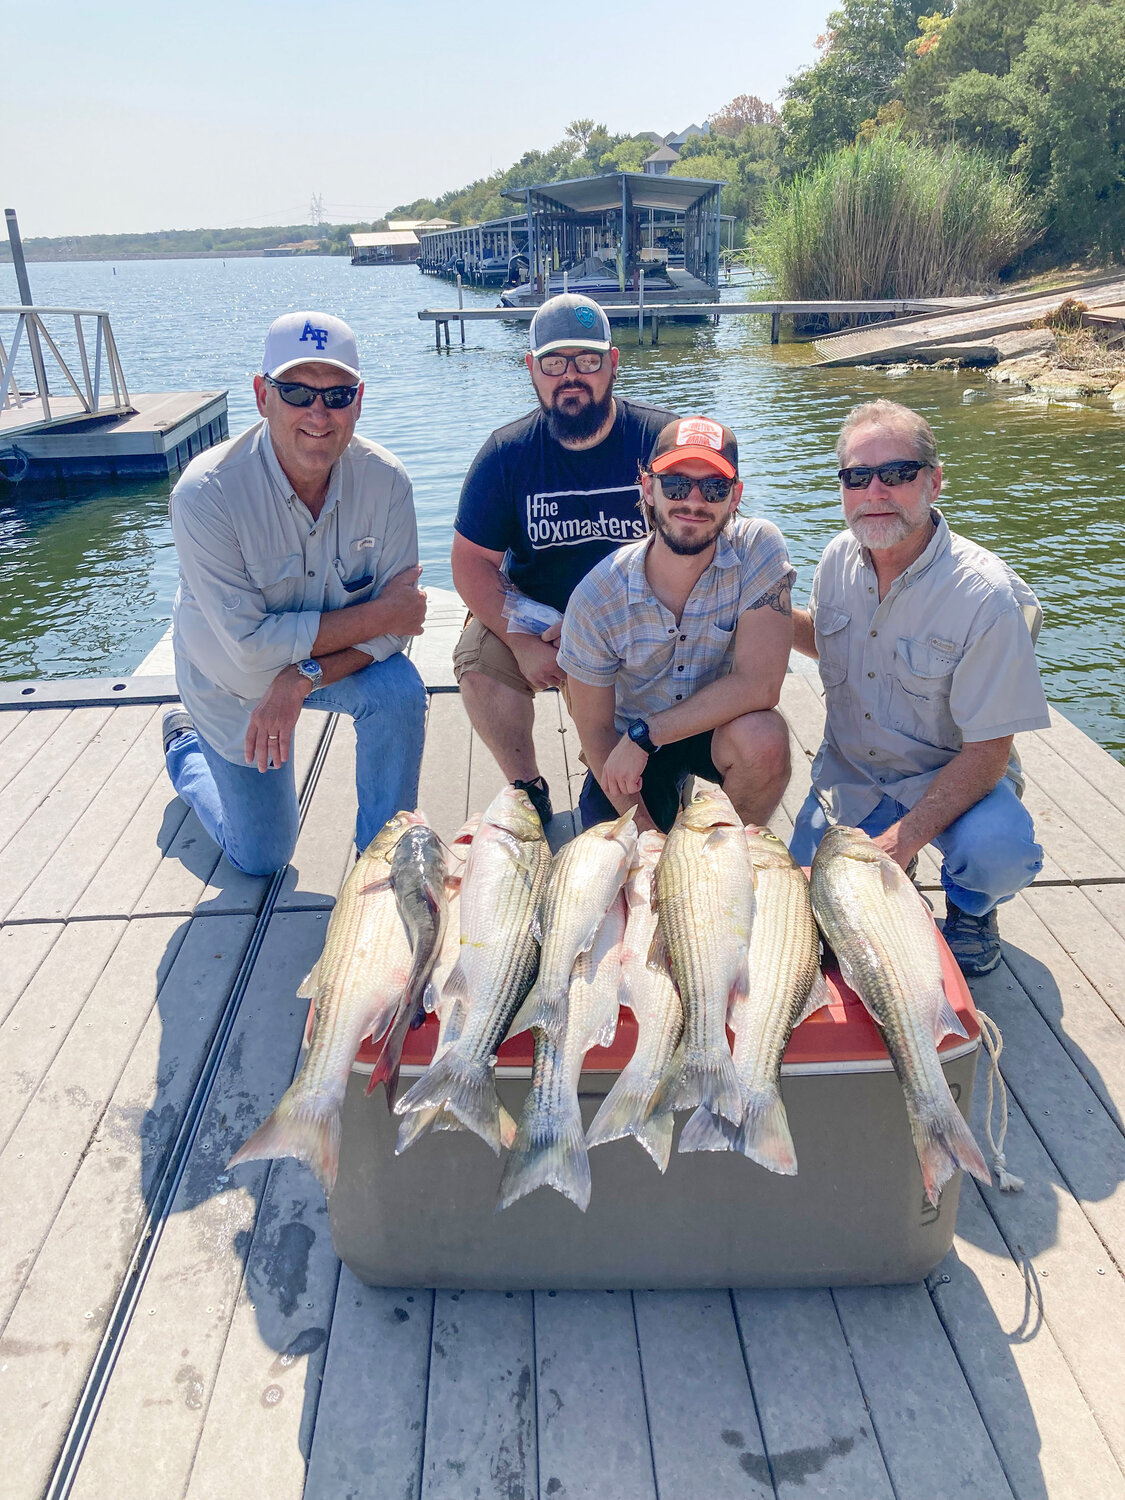 Pictured from left to right is Jim Rowland, Issac Rodriquez, Jonathan Hoogendoorn and John Hoogendoorn. Mr. Hoogendoorn is a Pecan Plantation resident and these folks enjoyed catching some big Granbury Striped bass this last weekend.